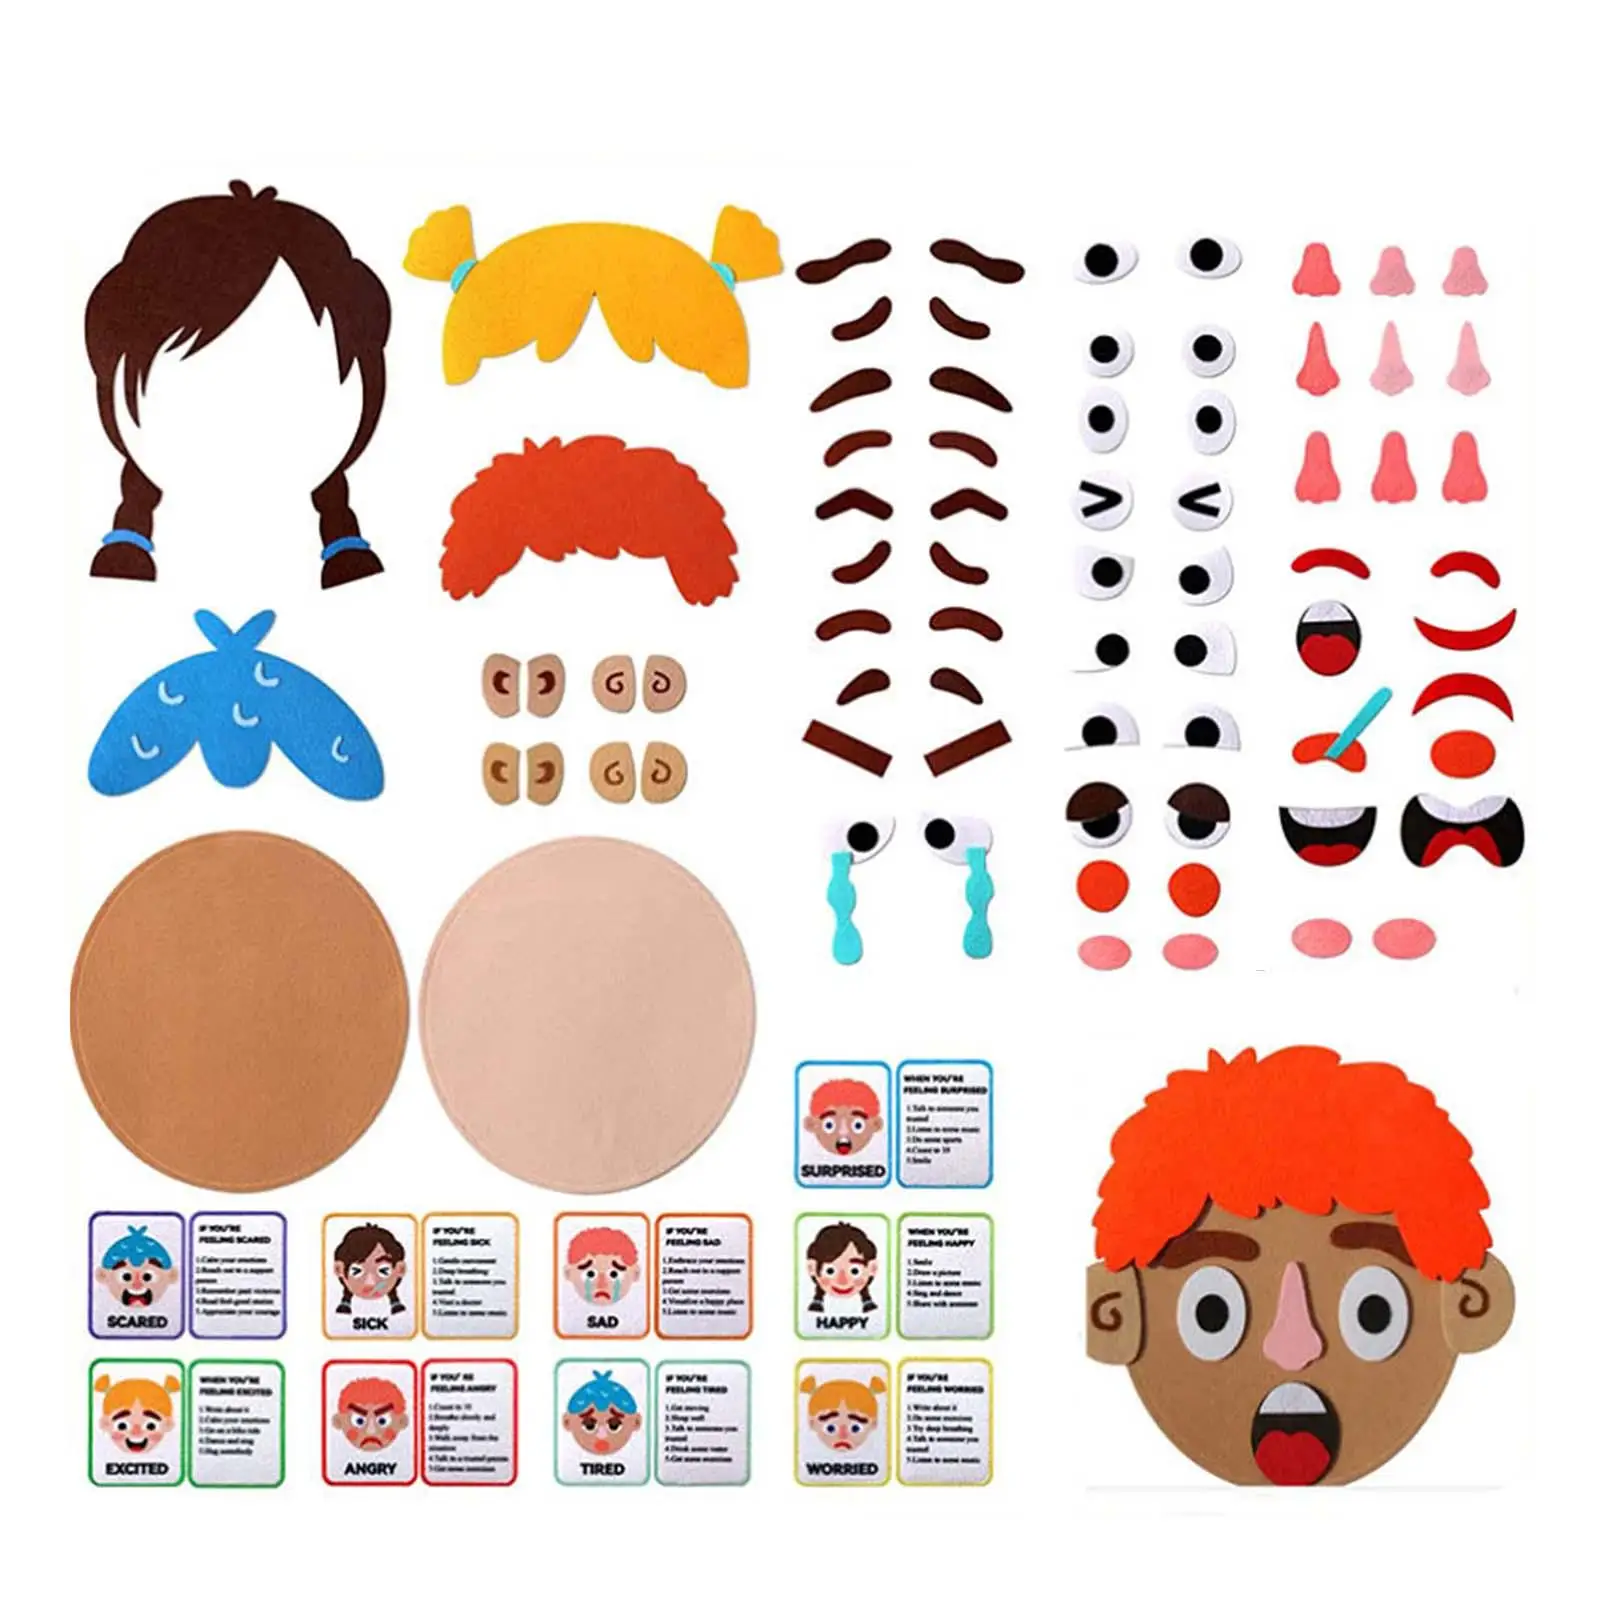 Social Emotional Learning Activities Express Emotions Faces Stickers Games Faces Games for Toddlers Children Boys Kids Ages 3+